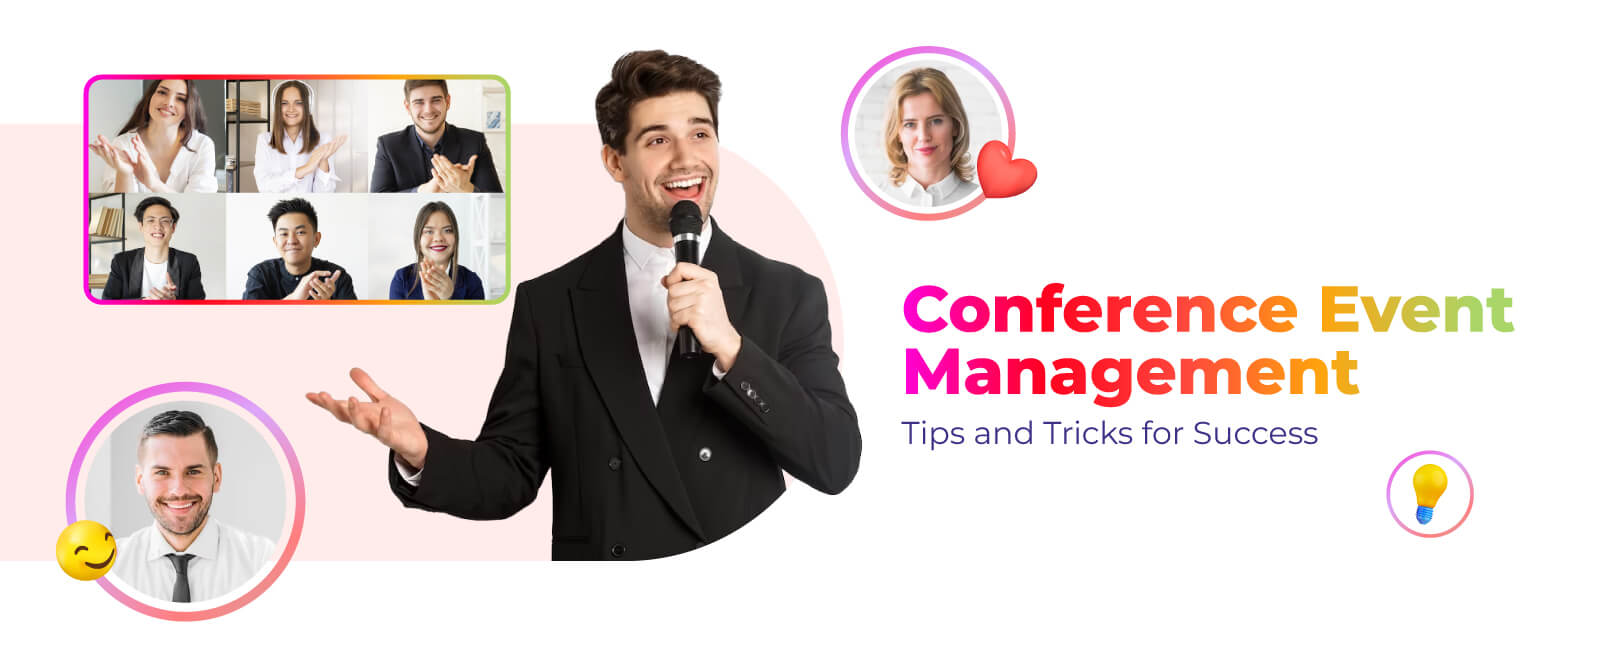 Conference Event Management: Tips and Tricks for Success